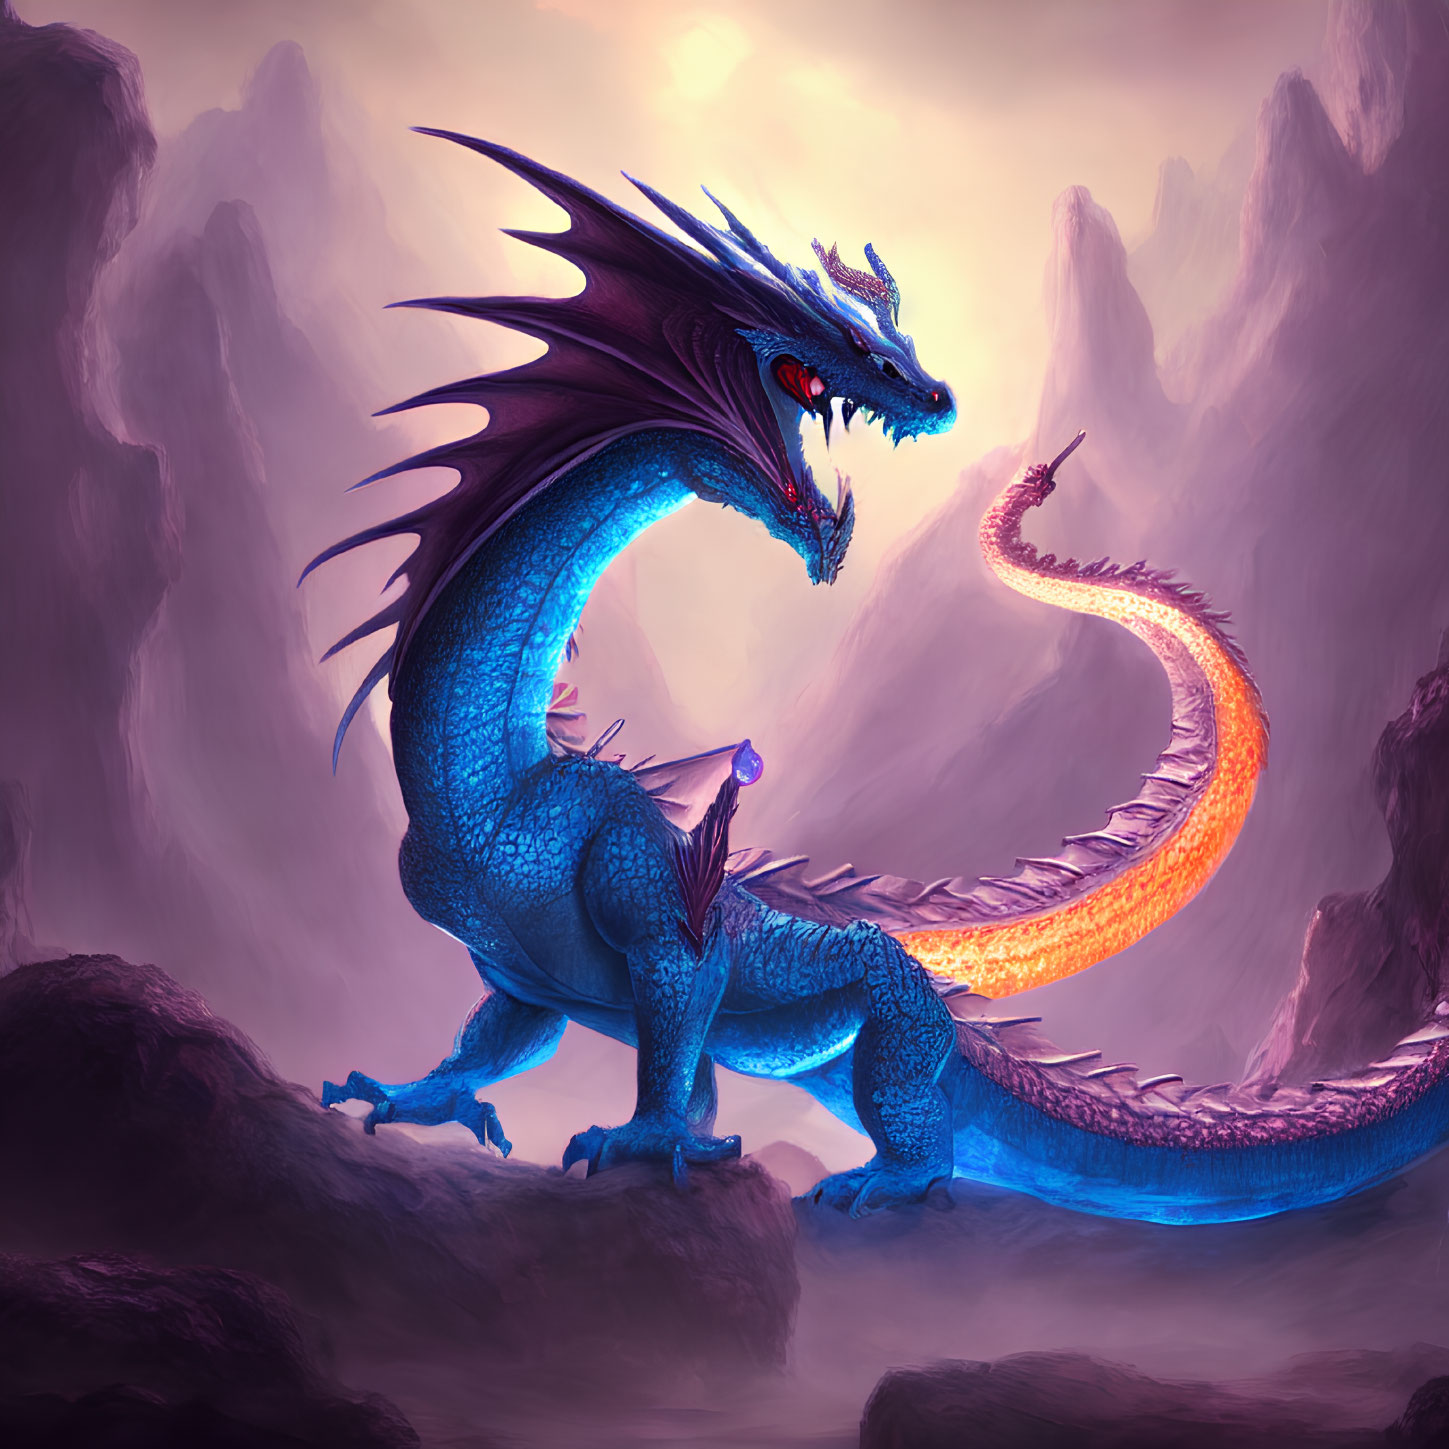 Blue dragon with purple accents on rocky outcrop in misty mountains under purple sky